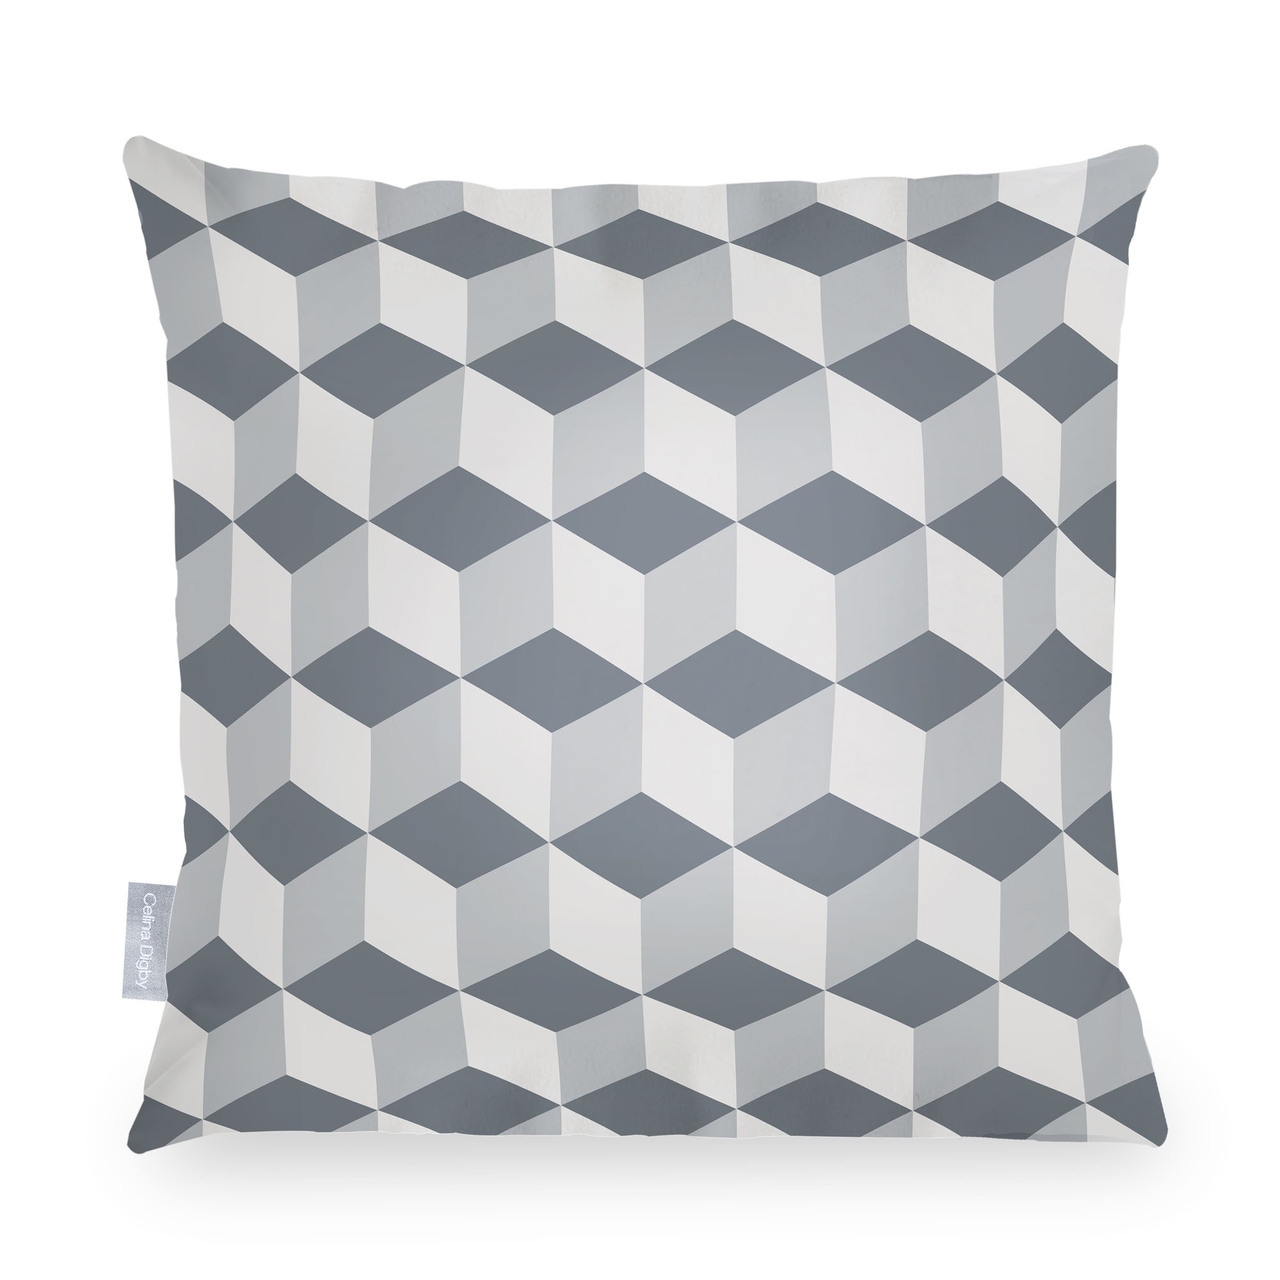 Celina Digby Luxury Water Resistant Garden Cushion – Cube Grey